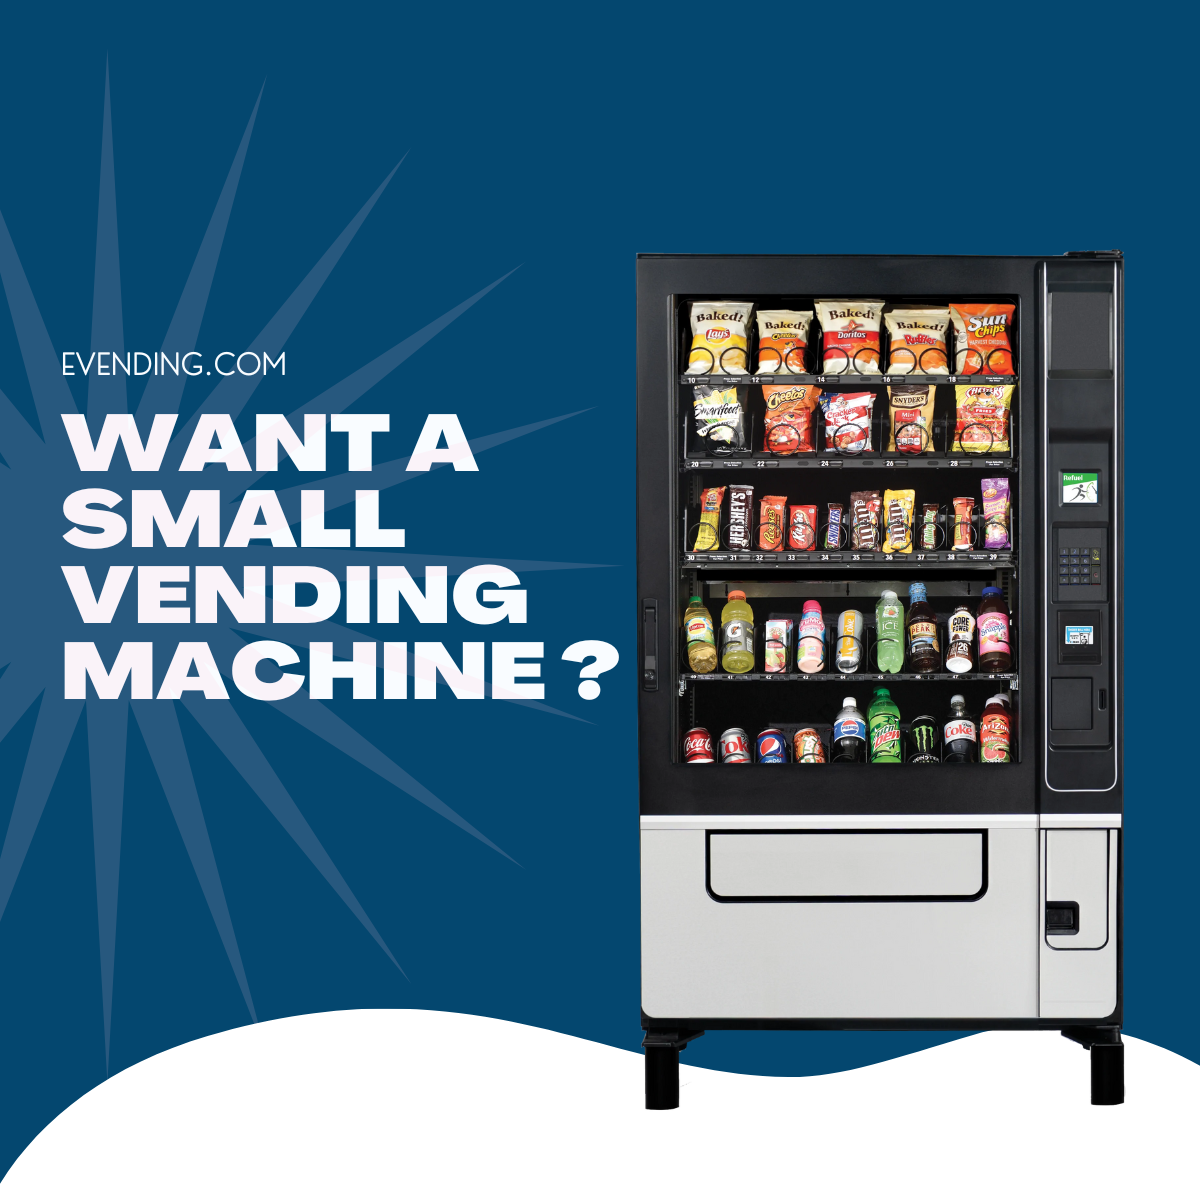 SMALL VENDING MACHINE OFFER SNACKS IN CROWDED ROOMS